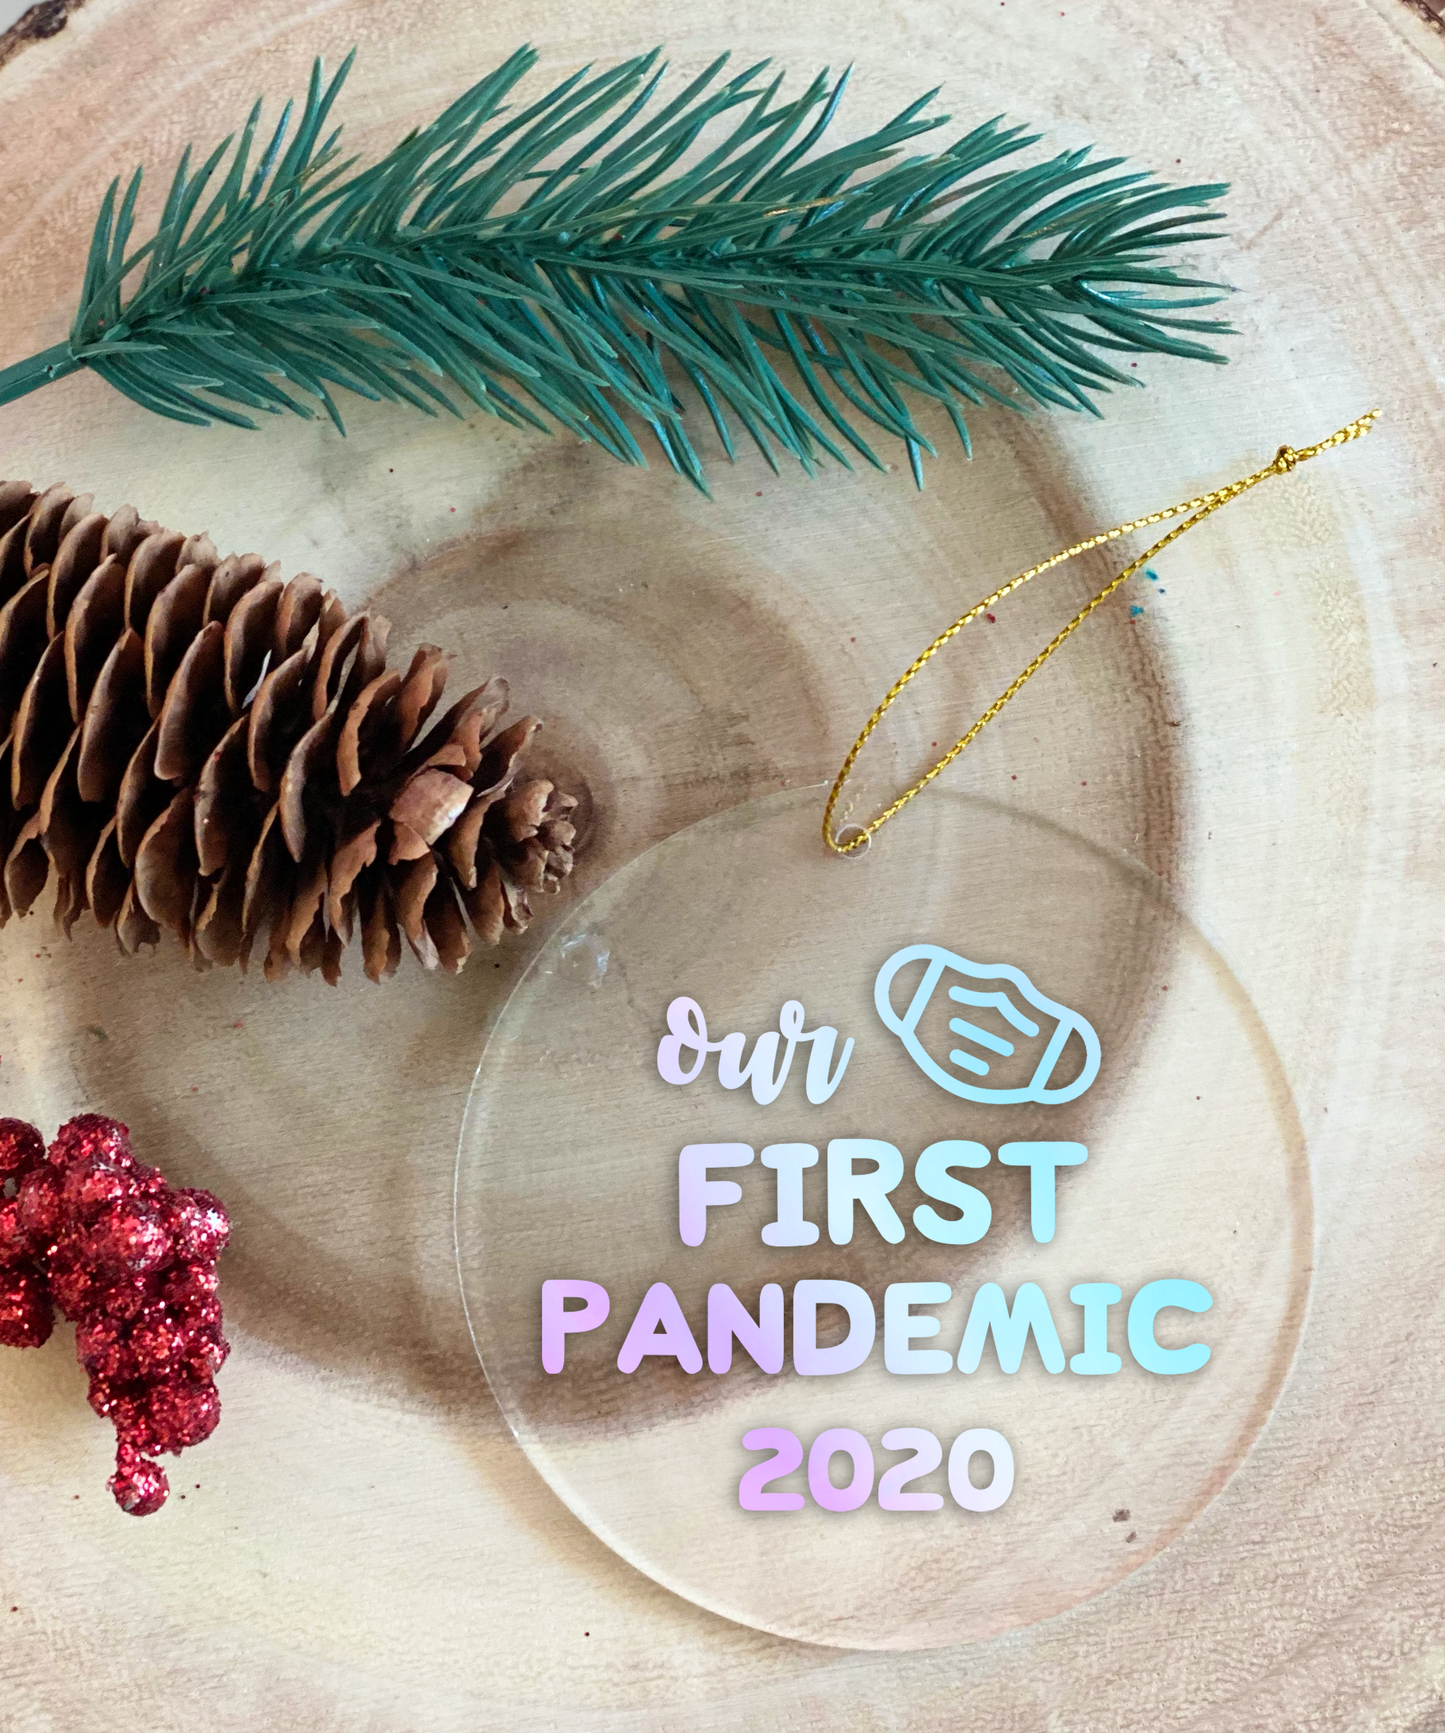 Our First Pandemic Christmas Ornament